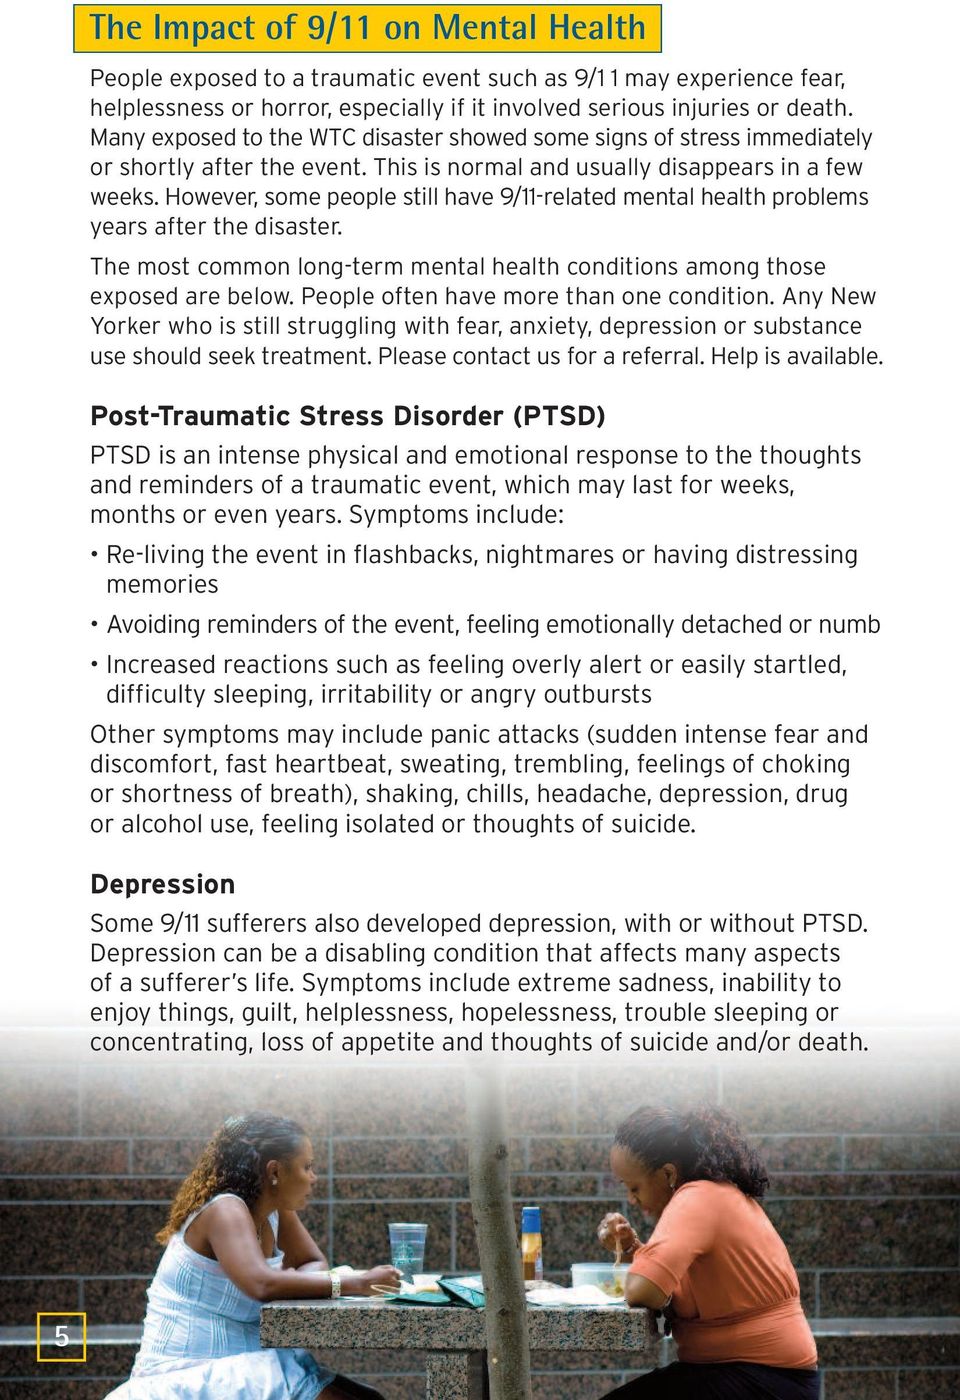 However, some people still have 9/11-related mental health problems years after the disaster. The most common long-term mental health conditions among those exposed are below.